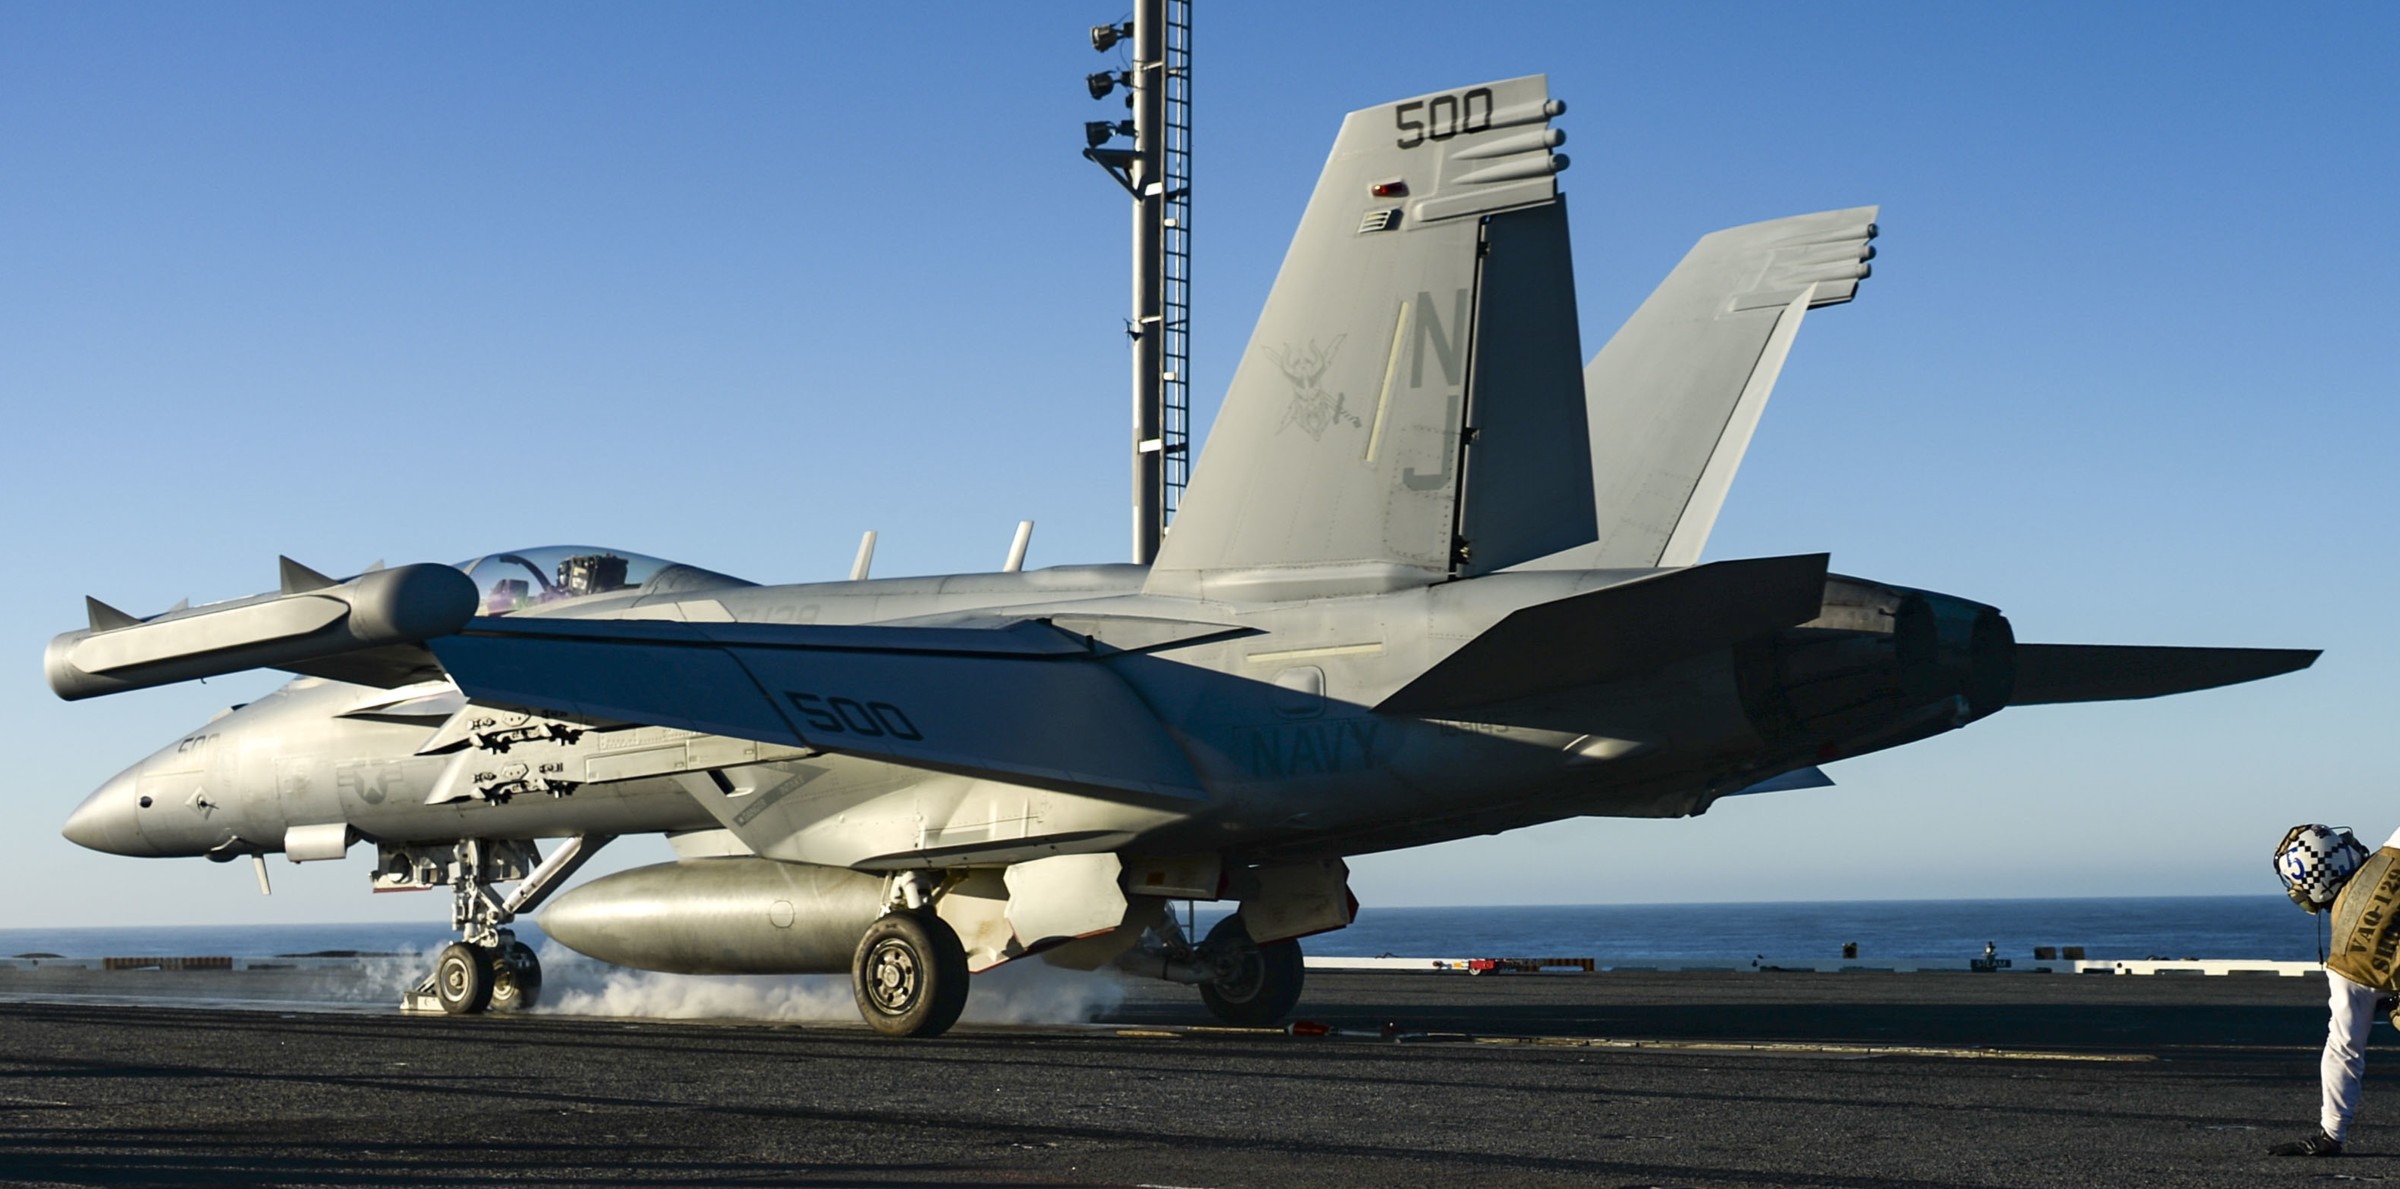 vaq-129 vikings electronic attack squadron fleet replacement frs us navy ea-18g growler 69